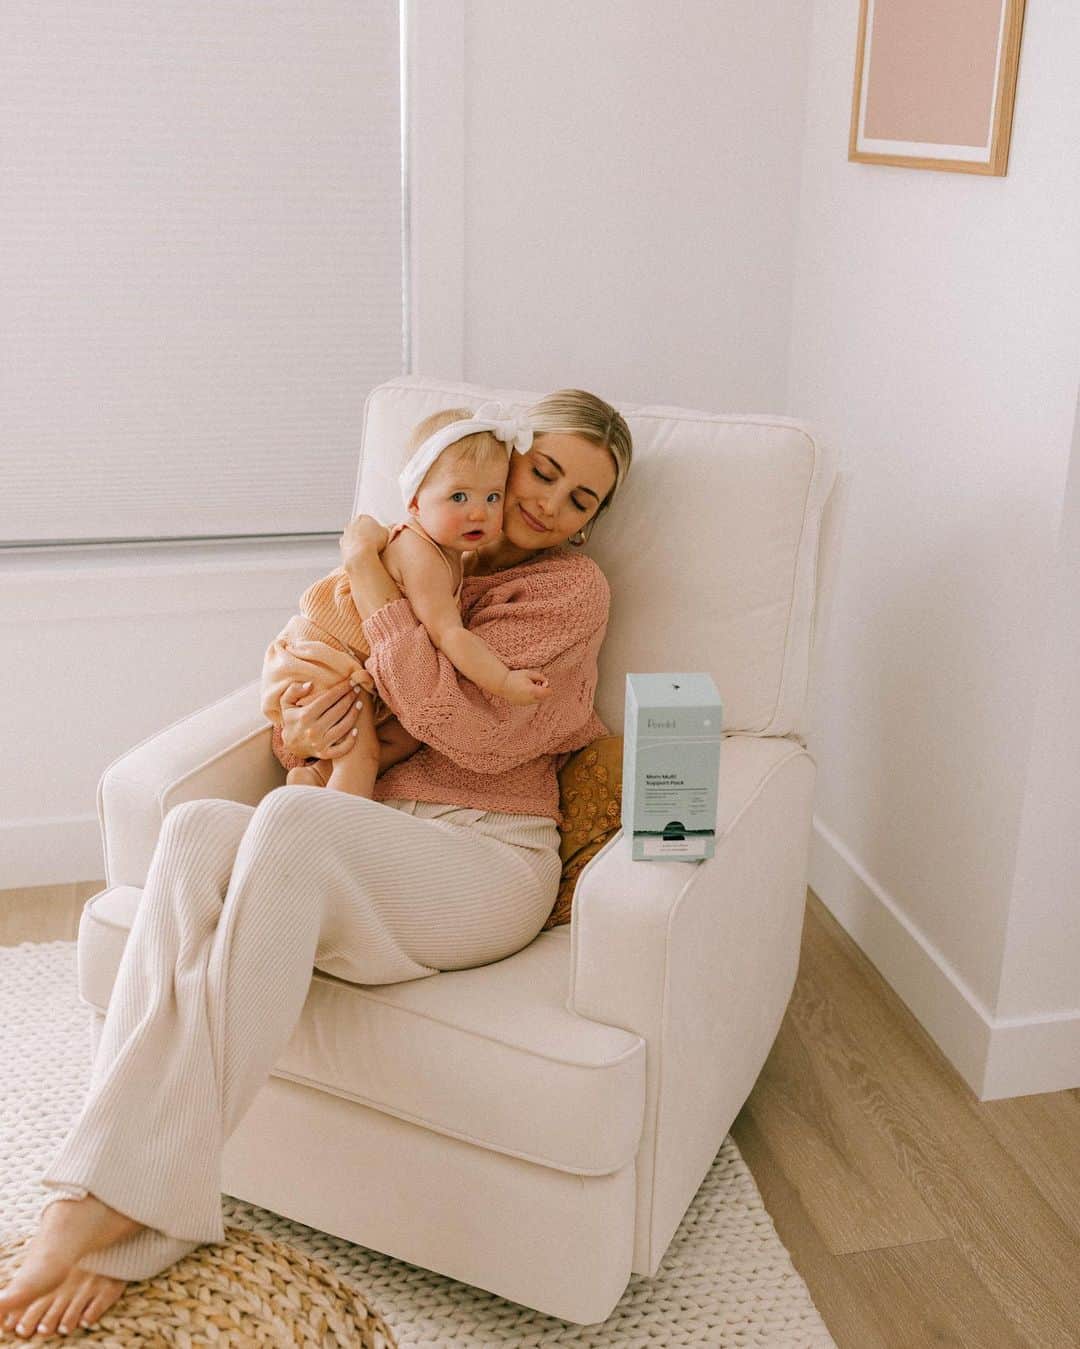 Aspyn Ovard Ferrisのインスタグラム：「Always thinking about my baby and how I have to take care of myself to take the best care of her 💕 @perelelhealth vitamins change with you throughout your motherhood journey from preconception to postpartum and beyond! The vitamins have the nutrients you need and with every new subscription, they donate a supply of their own prenatal vitamins to underserved women who lack access to these resources! You can swipe up on the link in my story and use code ASPYN15 for 15% off your first order 😚 #perelelpartner」